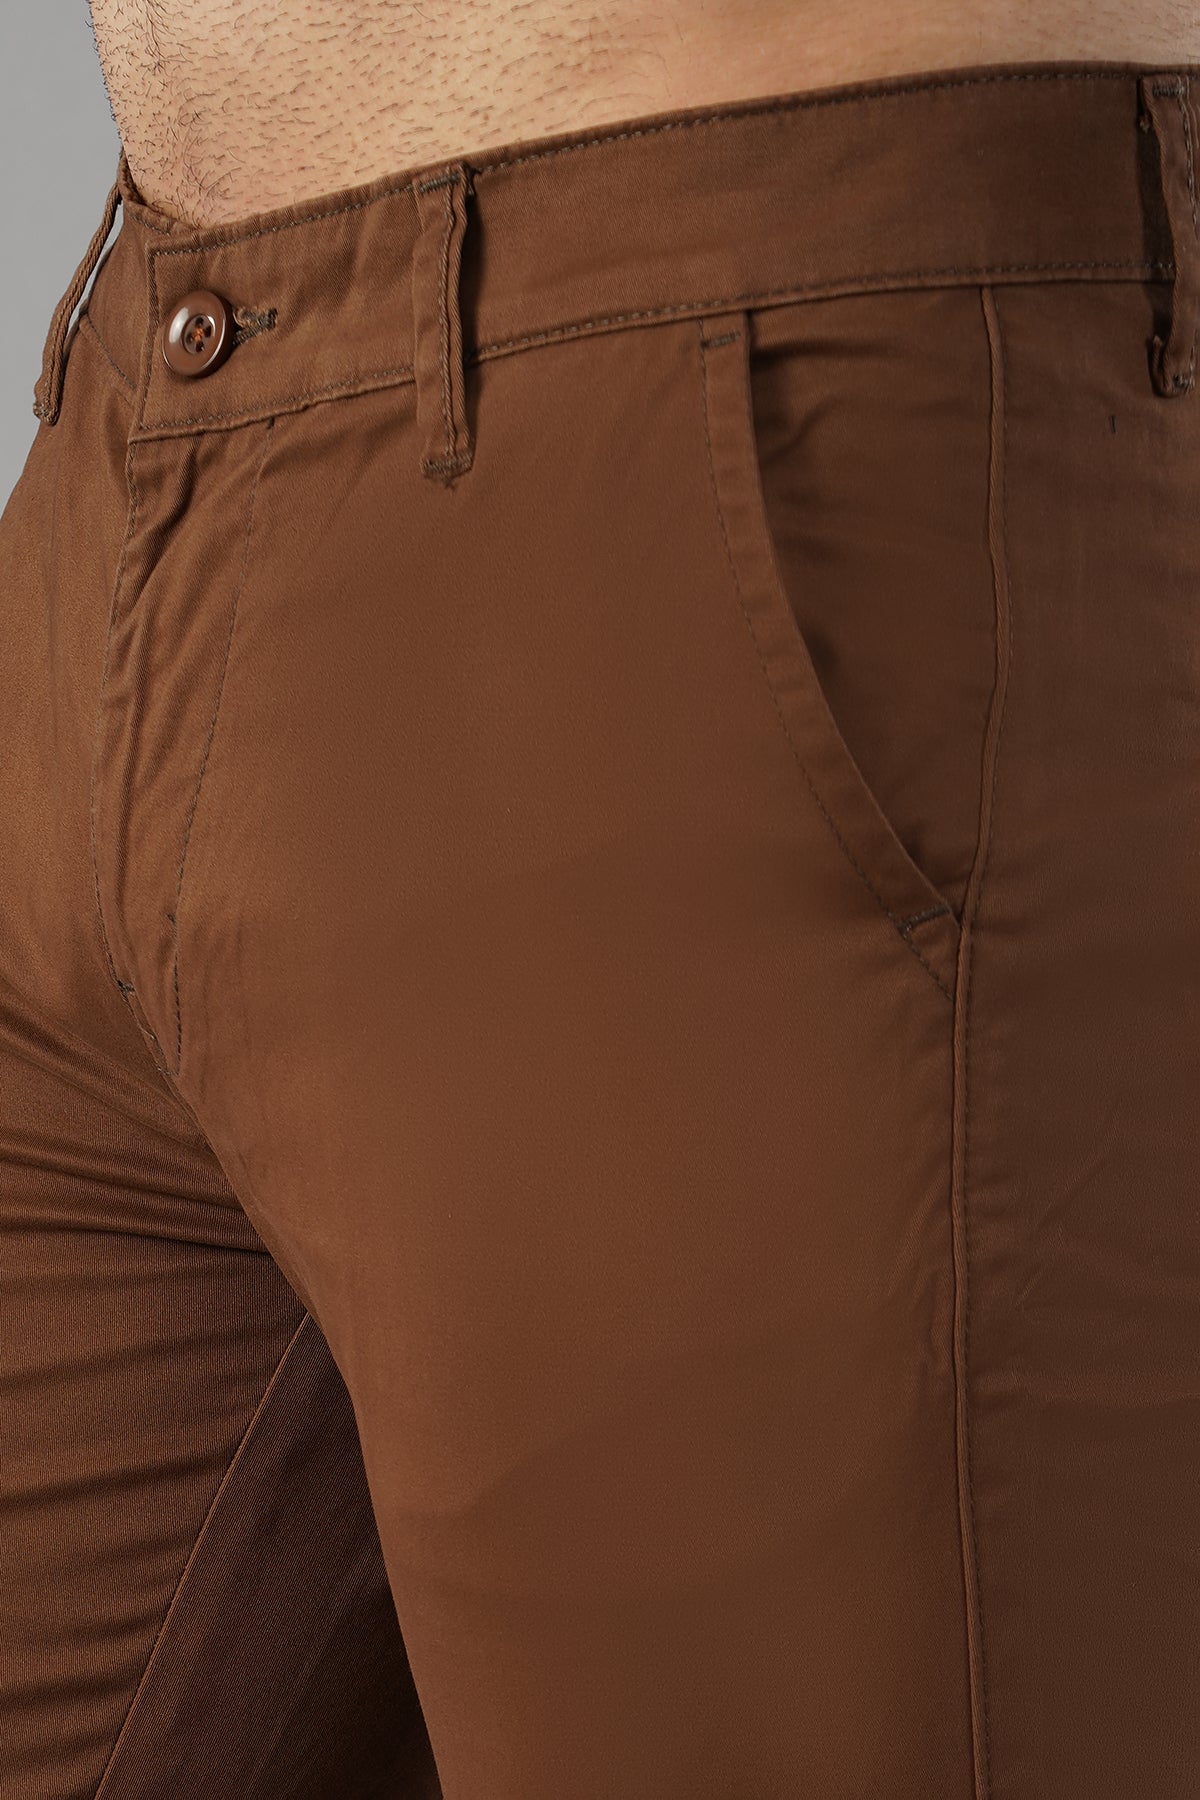 MENS BRUNETTE CROPPED CHINOS